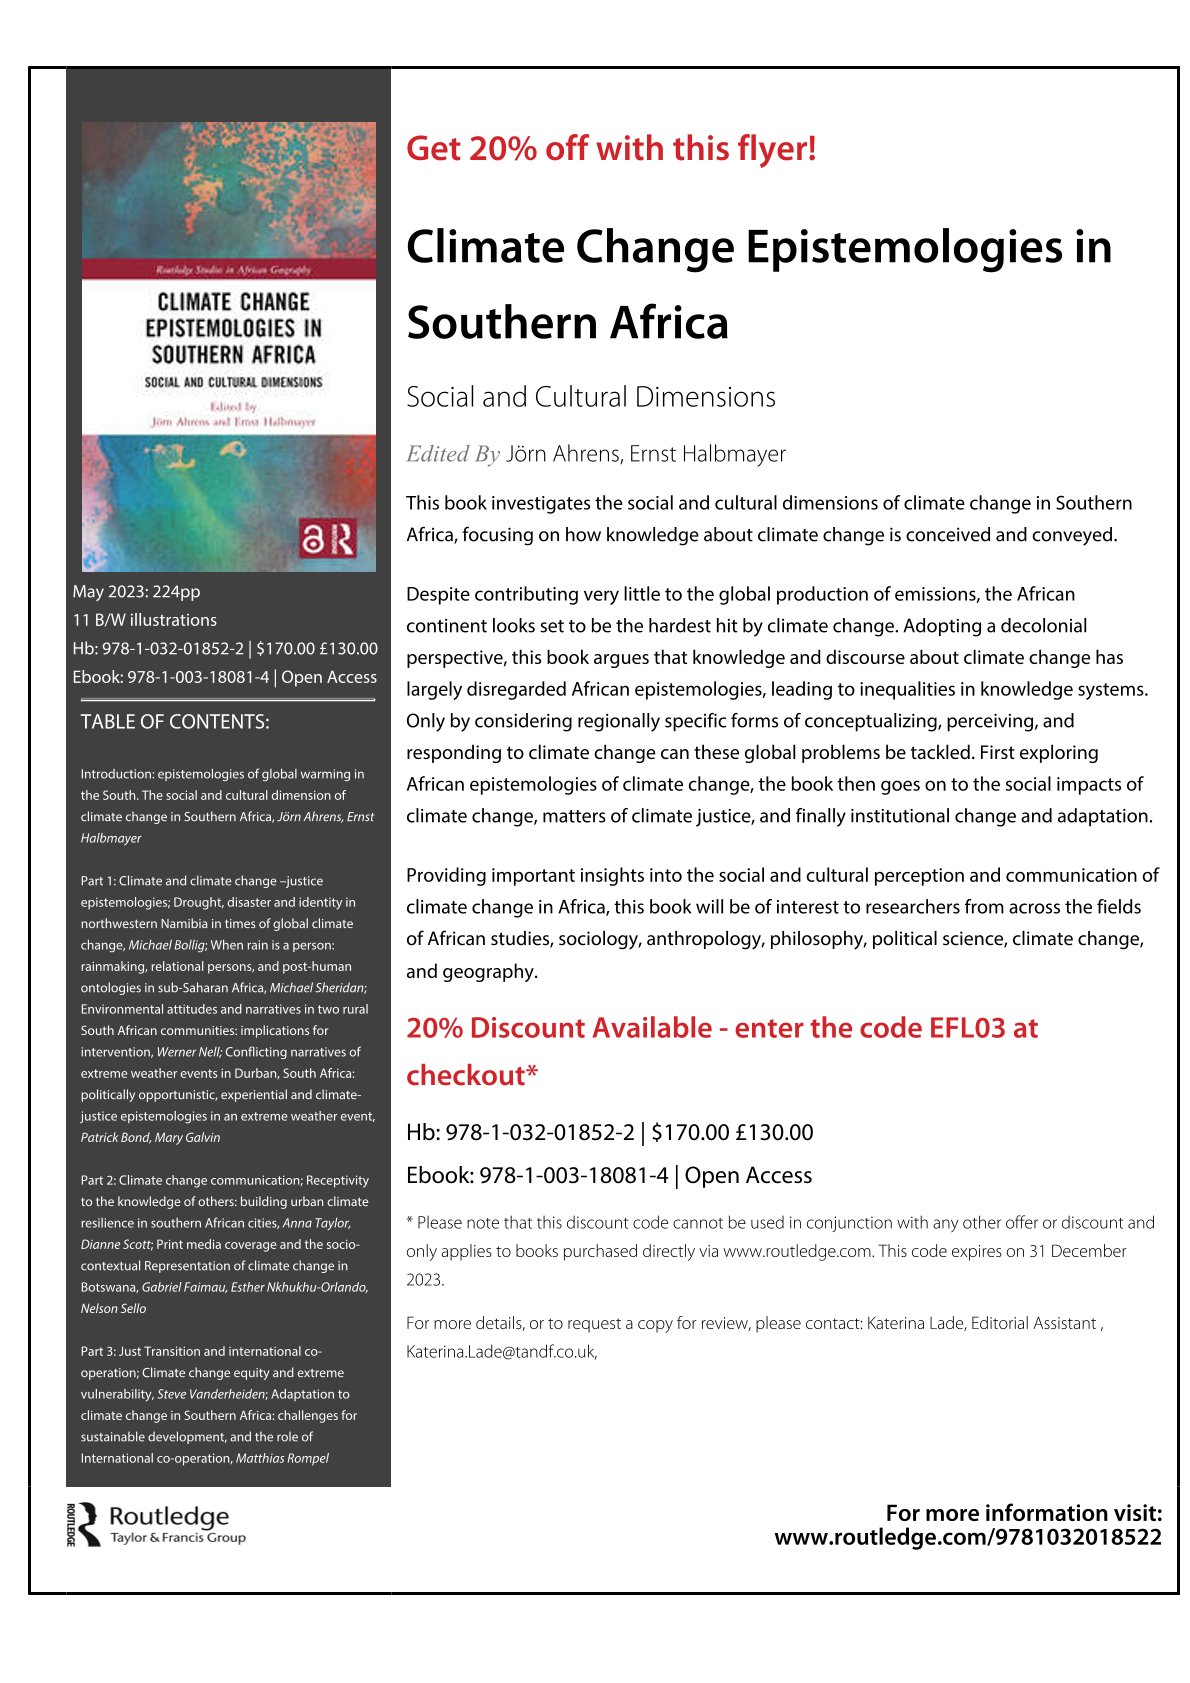 Climate Change Epistemologies in Southern Africa: Social and Cultural Dimensions